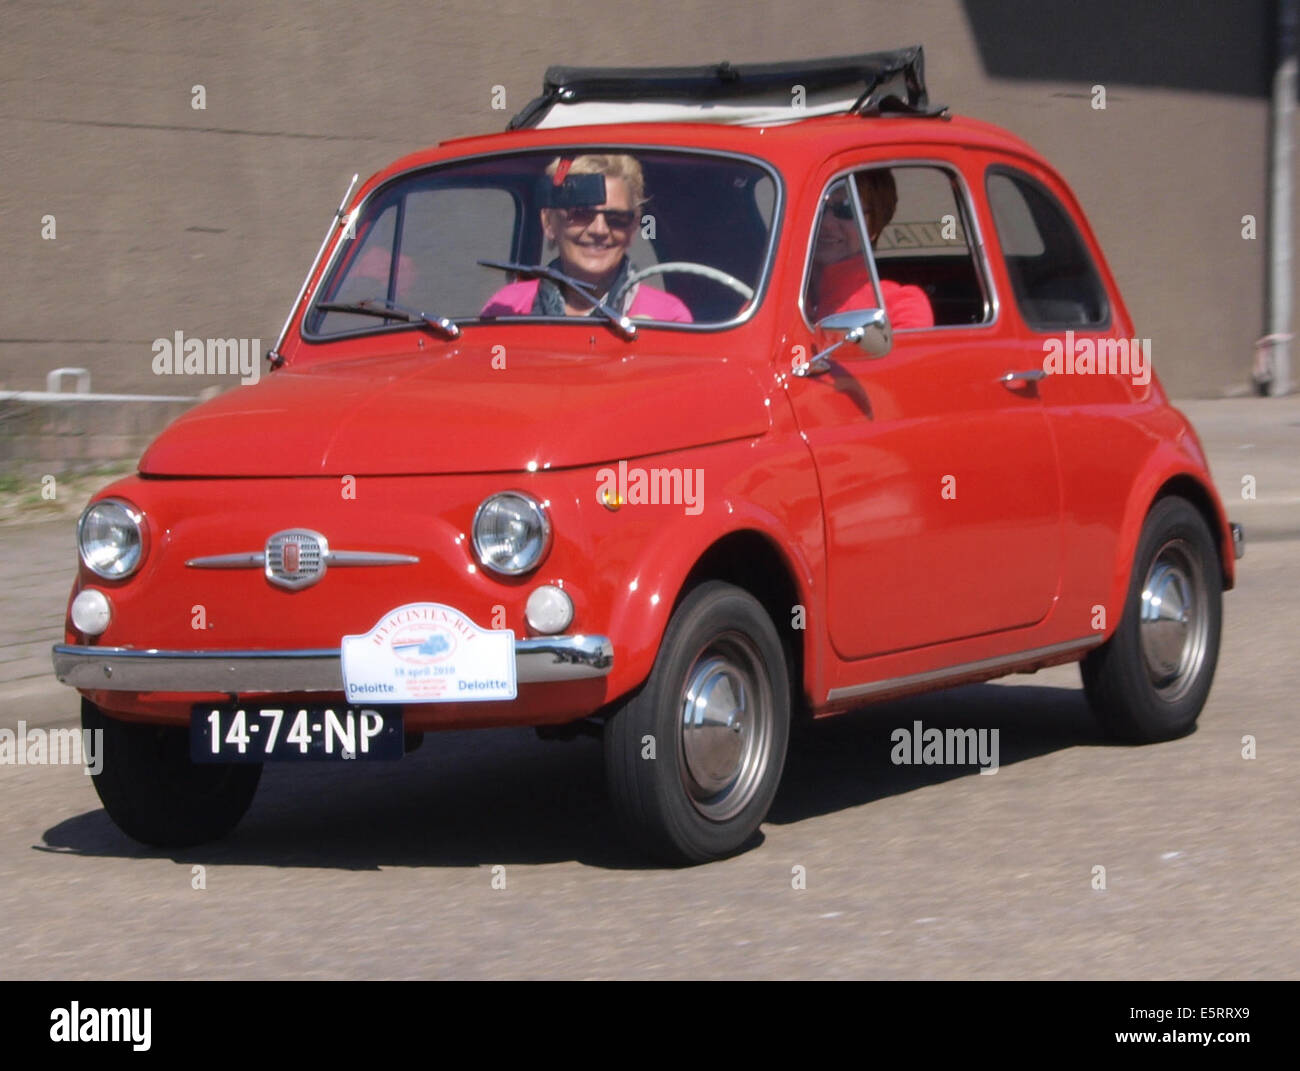 1970 Fiat , Dutch licence registration 14-74-NP, pic1 Stock Photo